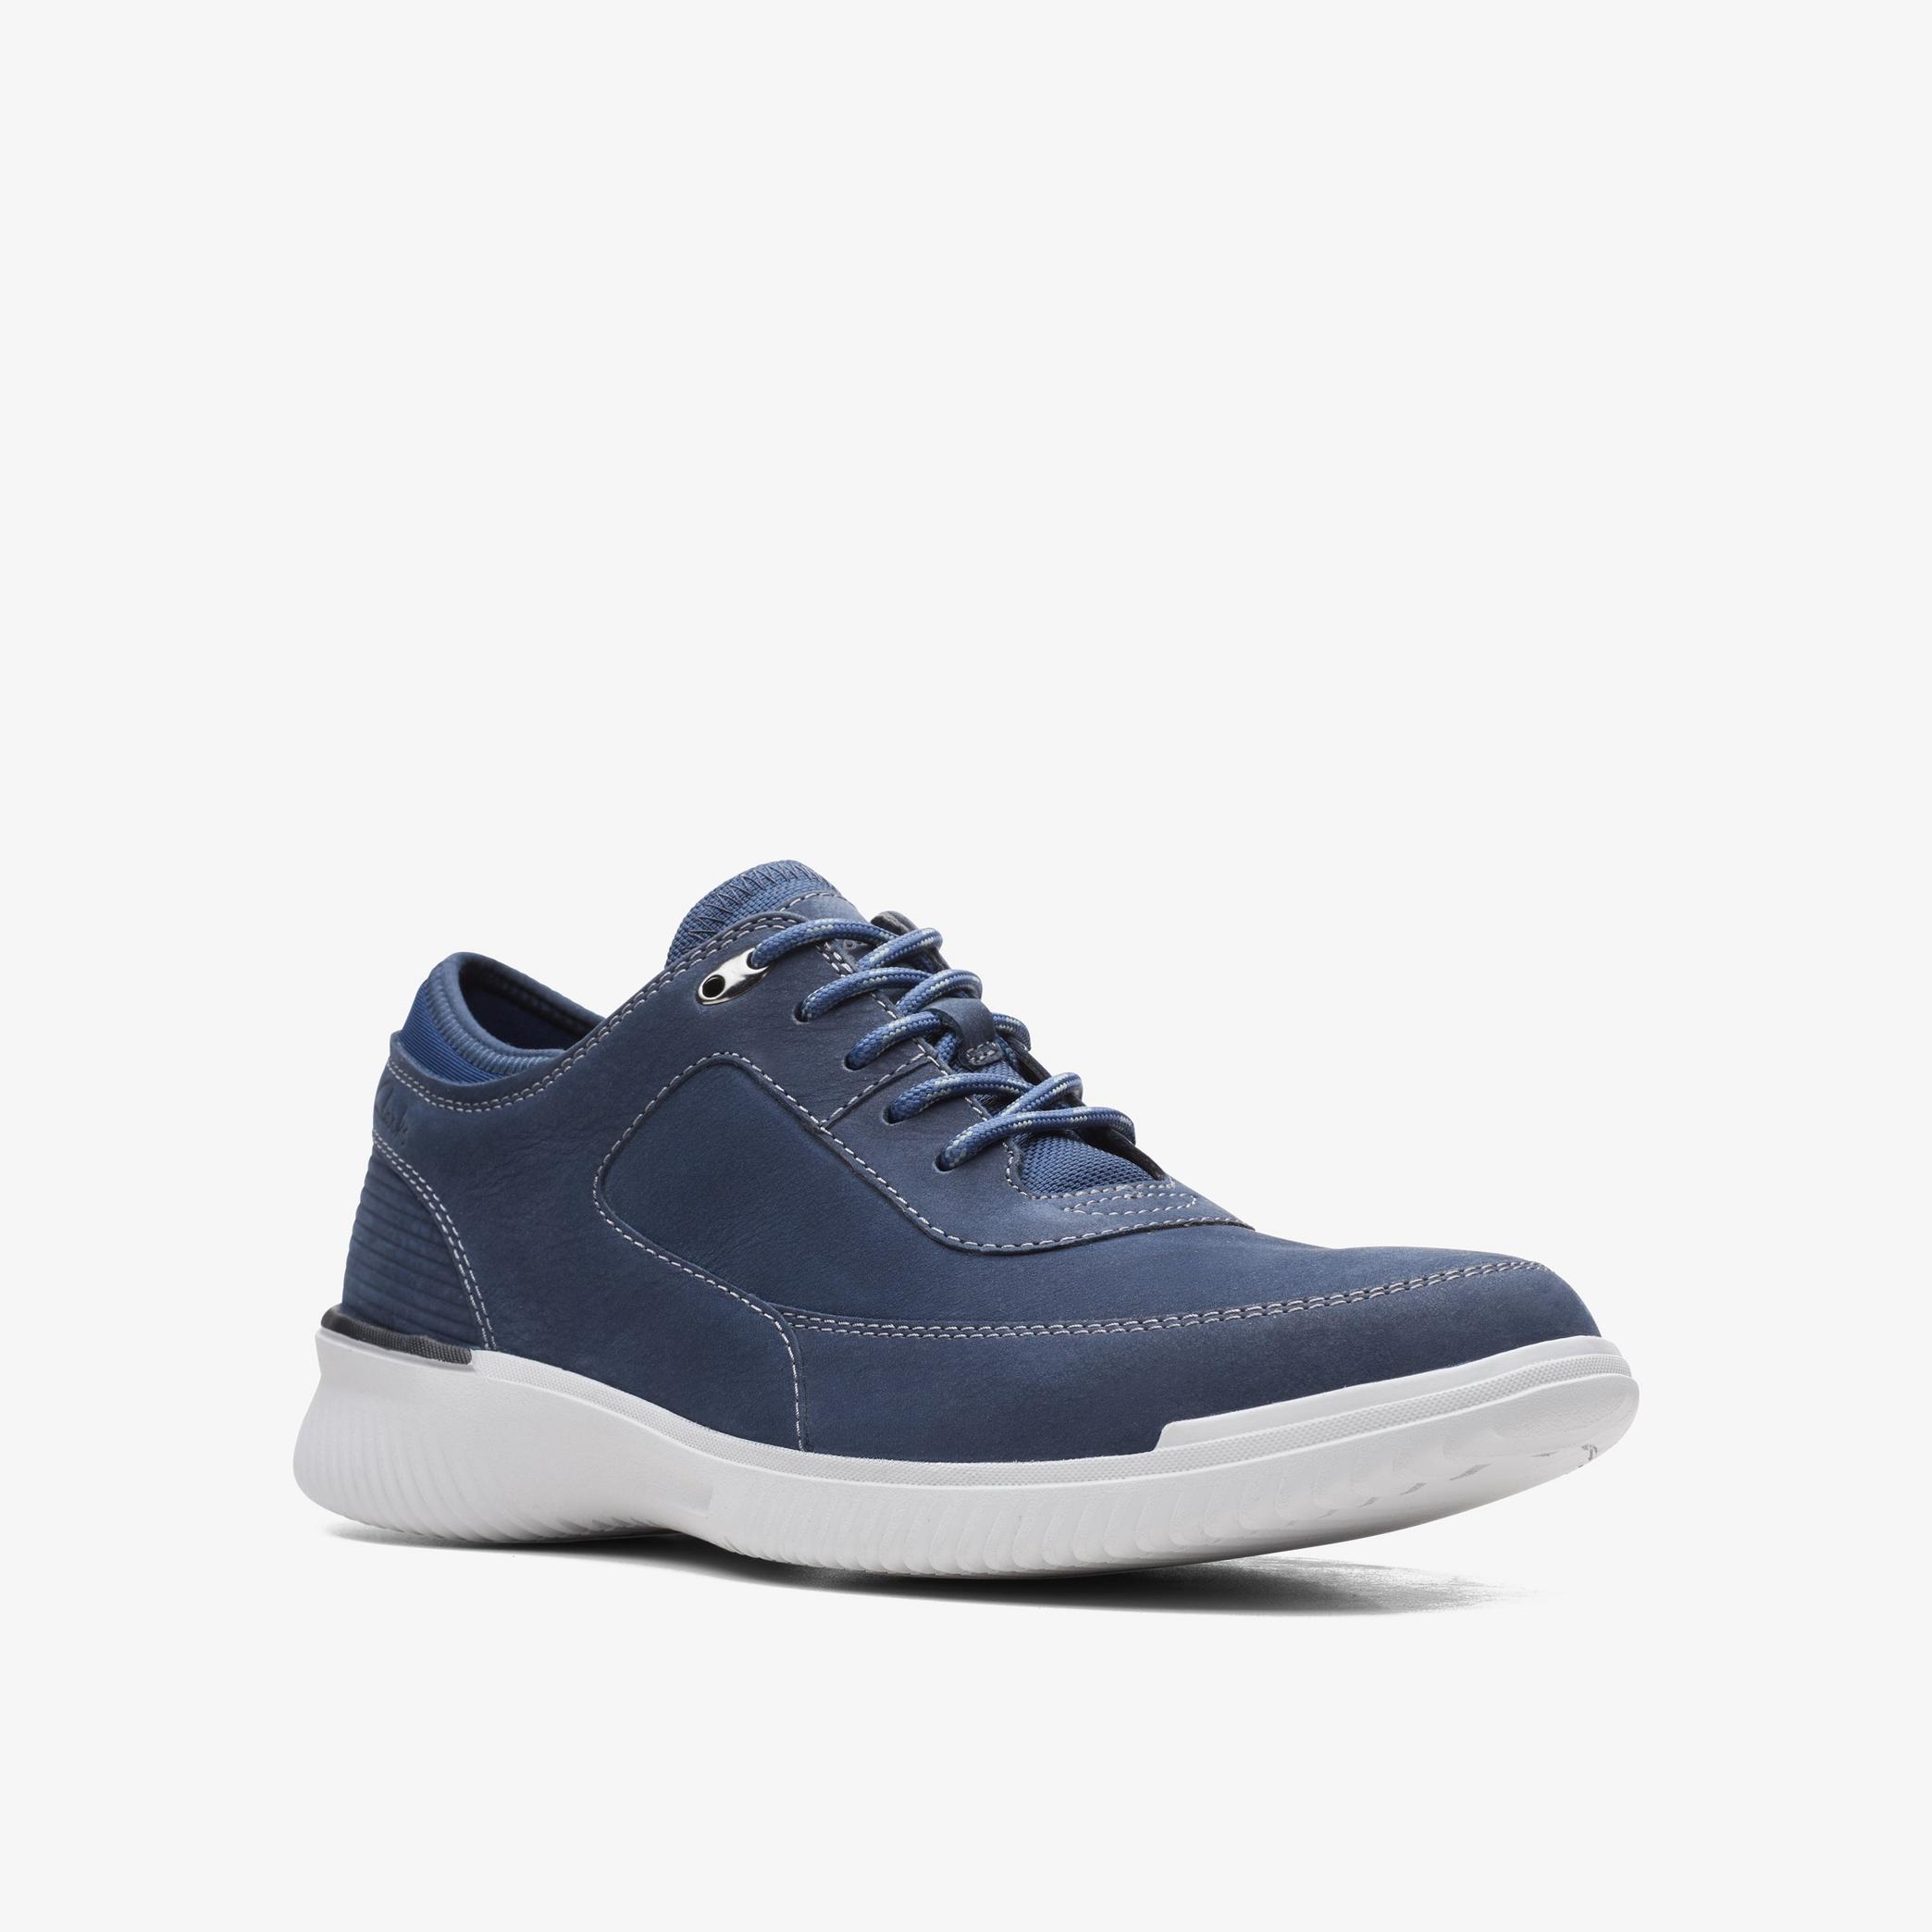 Donaway Lace Navy Nubuck Shoes, view 3 of 6